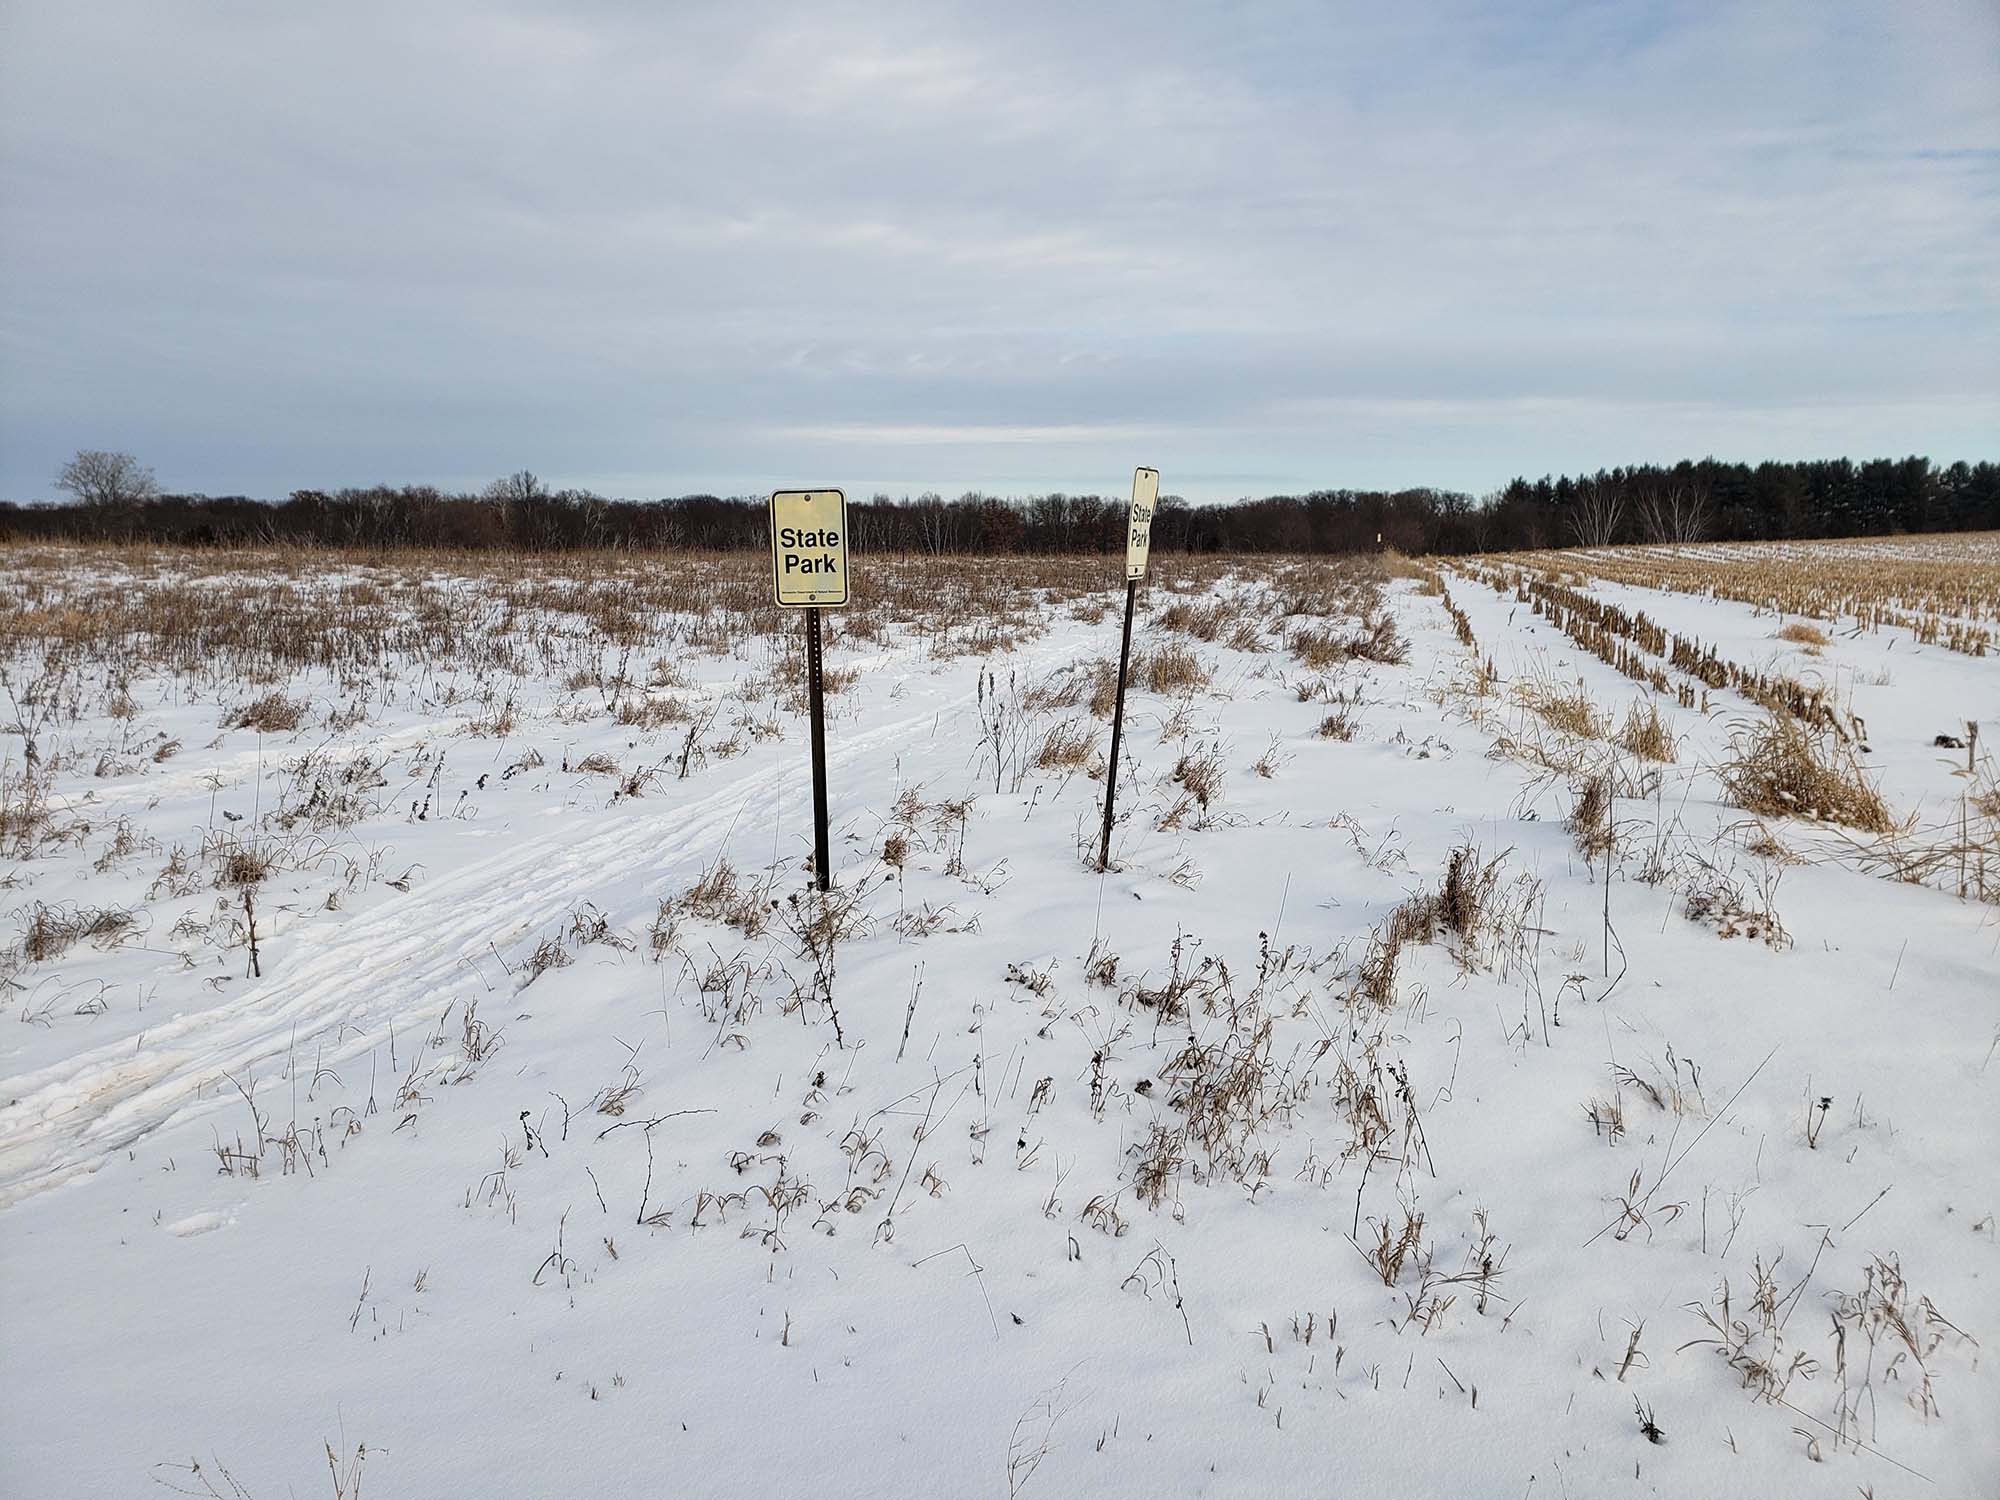 Snowy field with signs that mark border of the state park